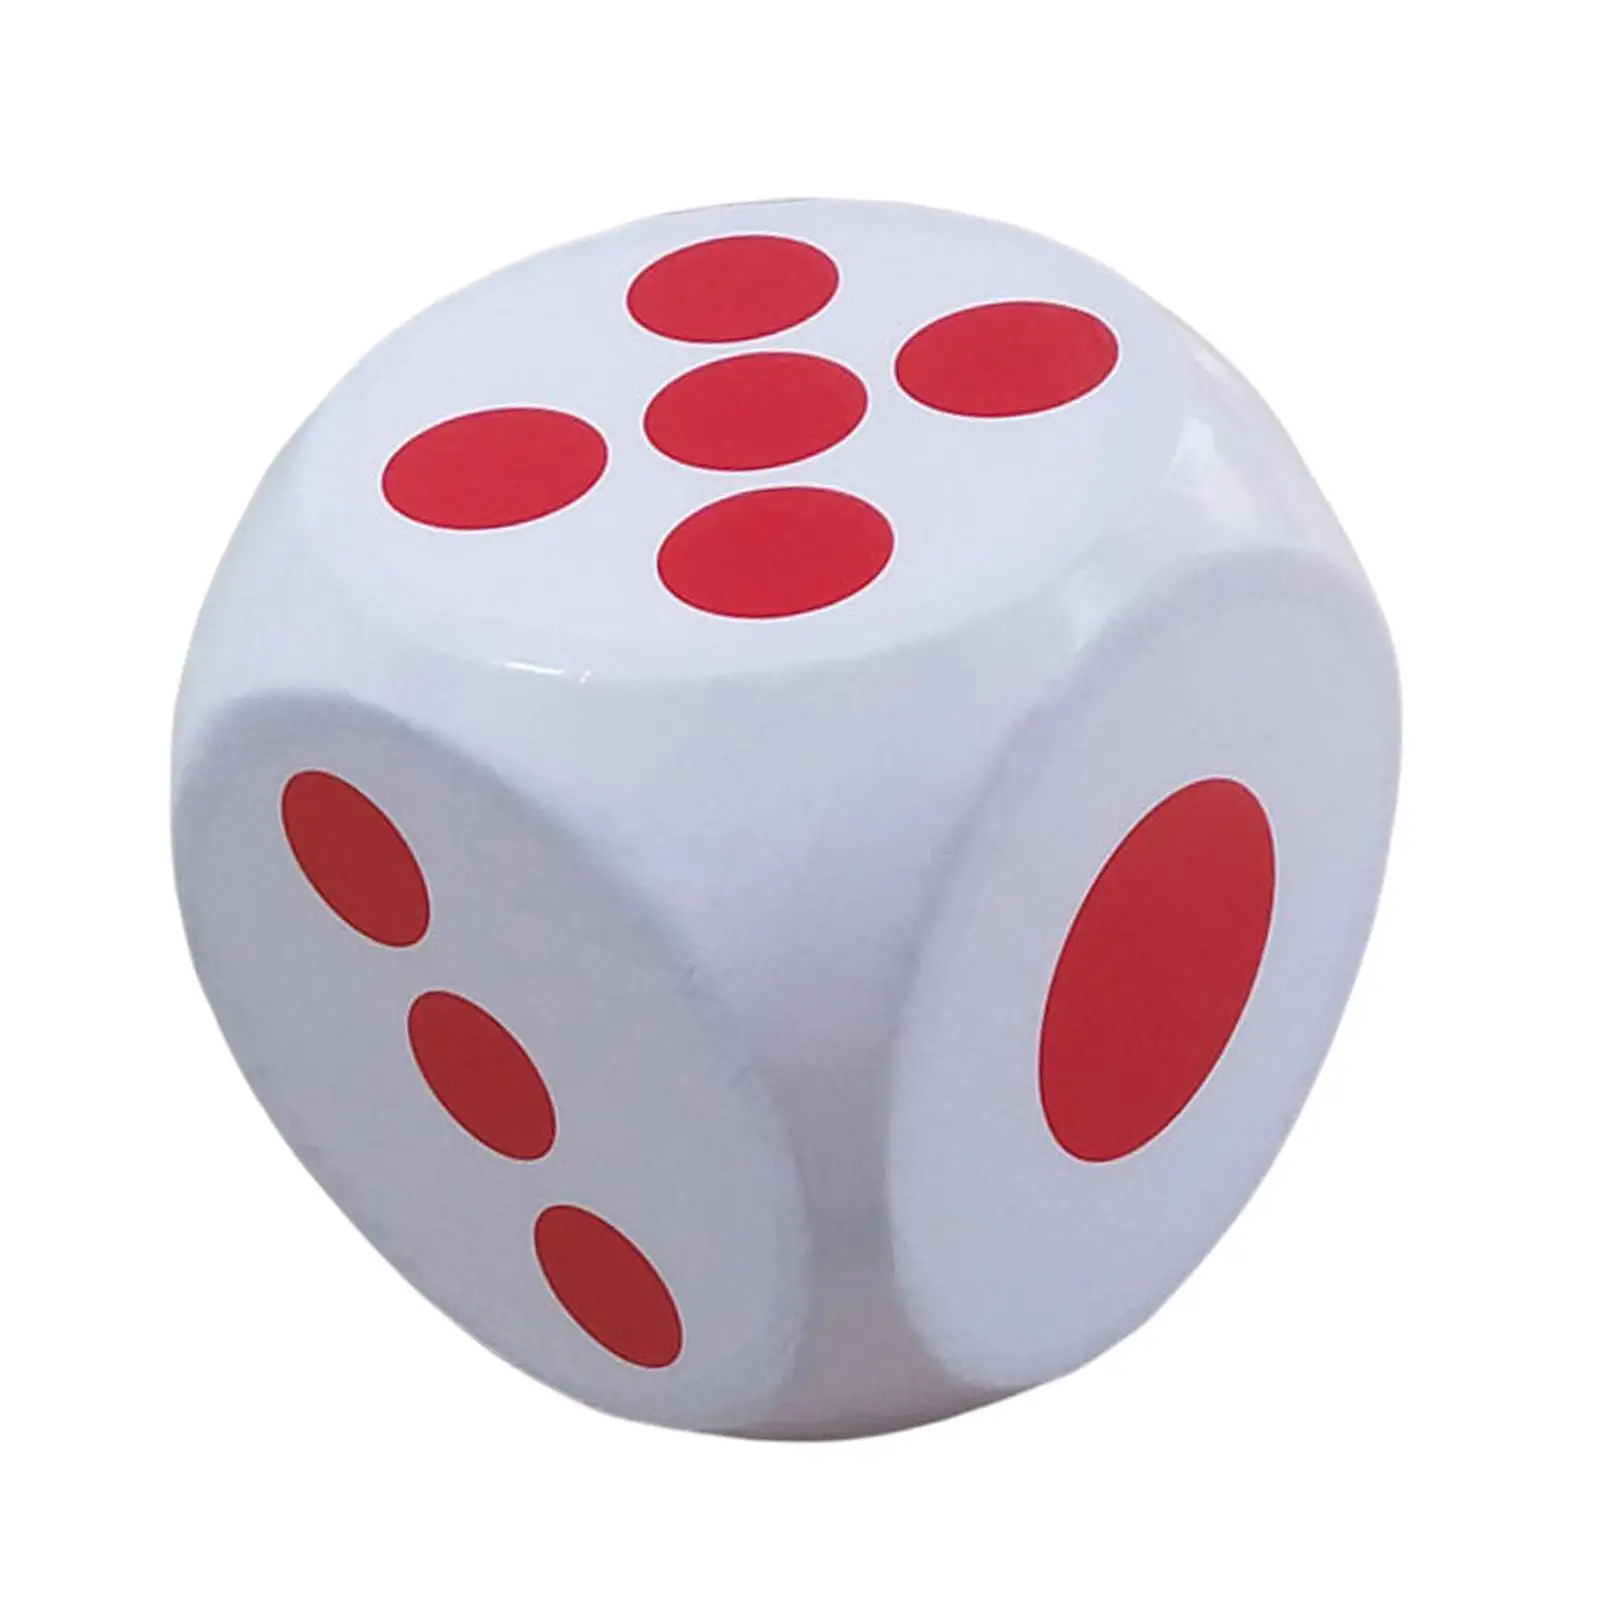 Foam Dice Big Square Blocks 5.9 inch Large Dice Cubes Party Favors and Supplies